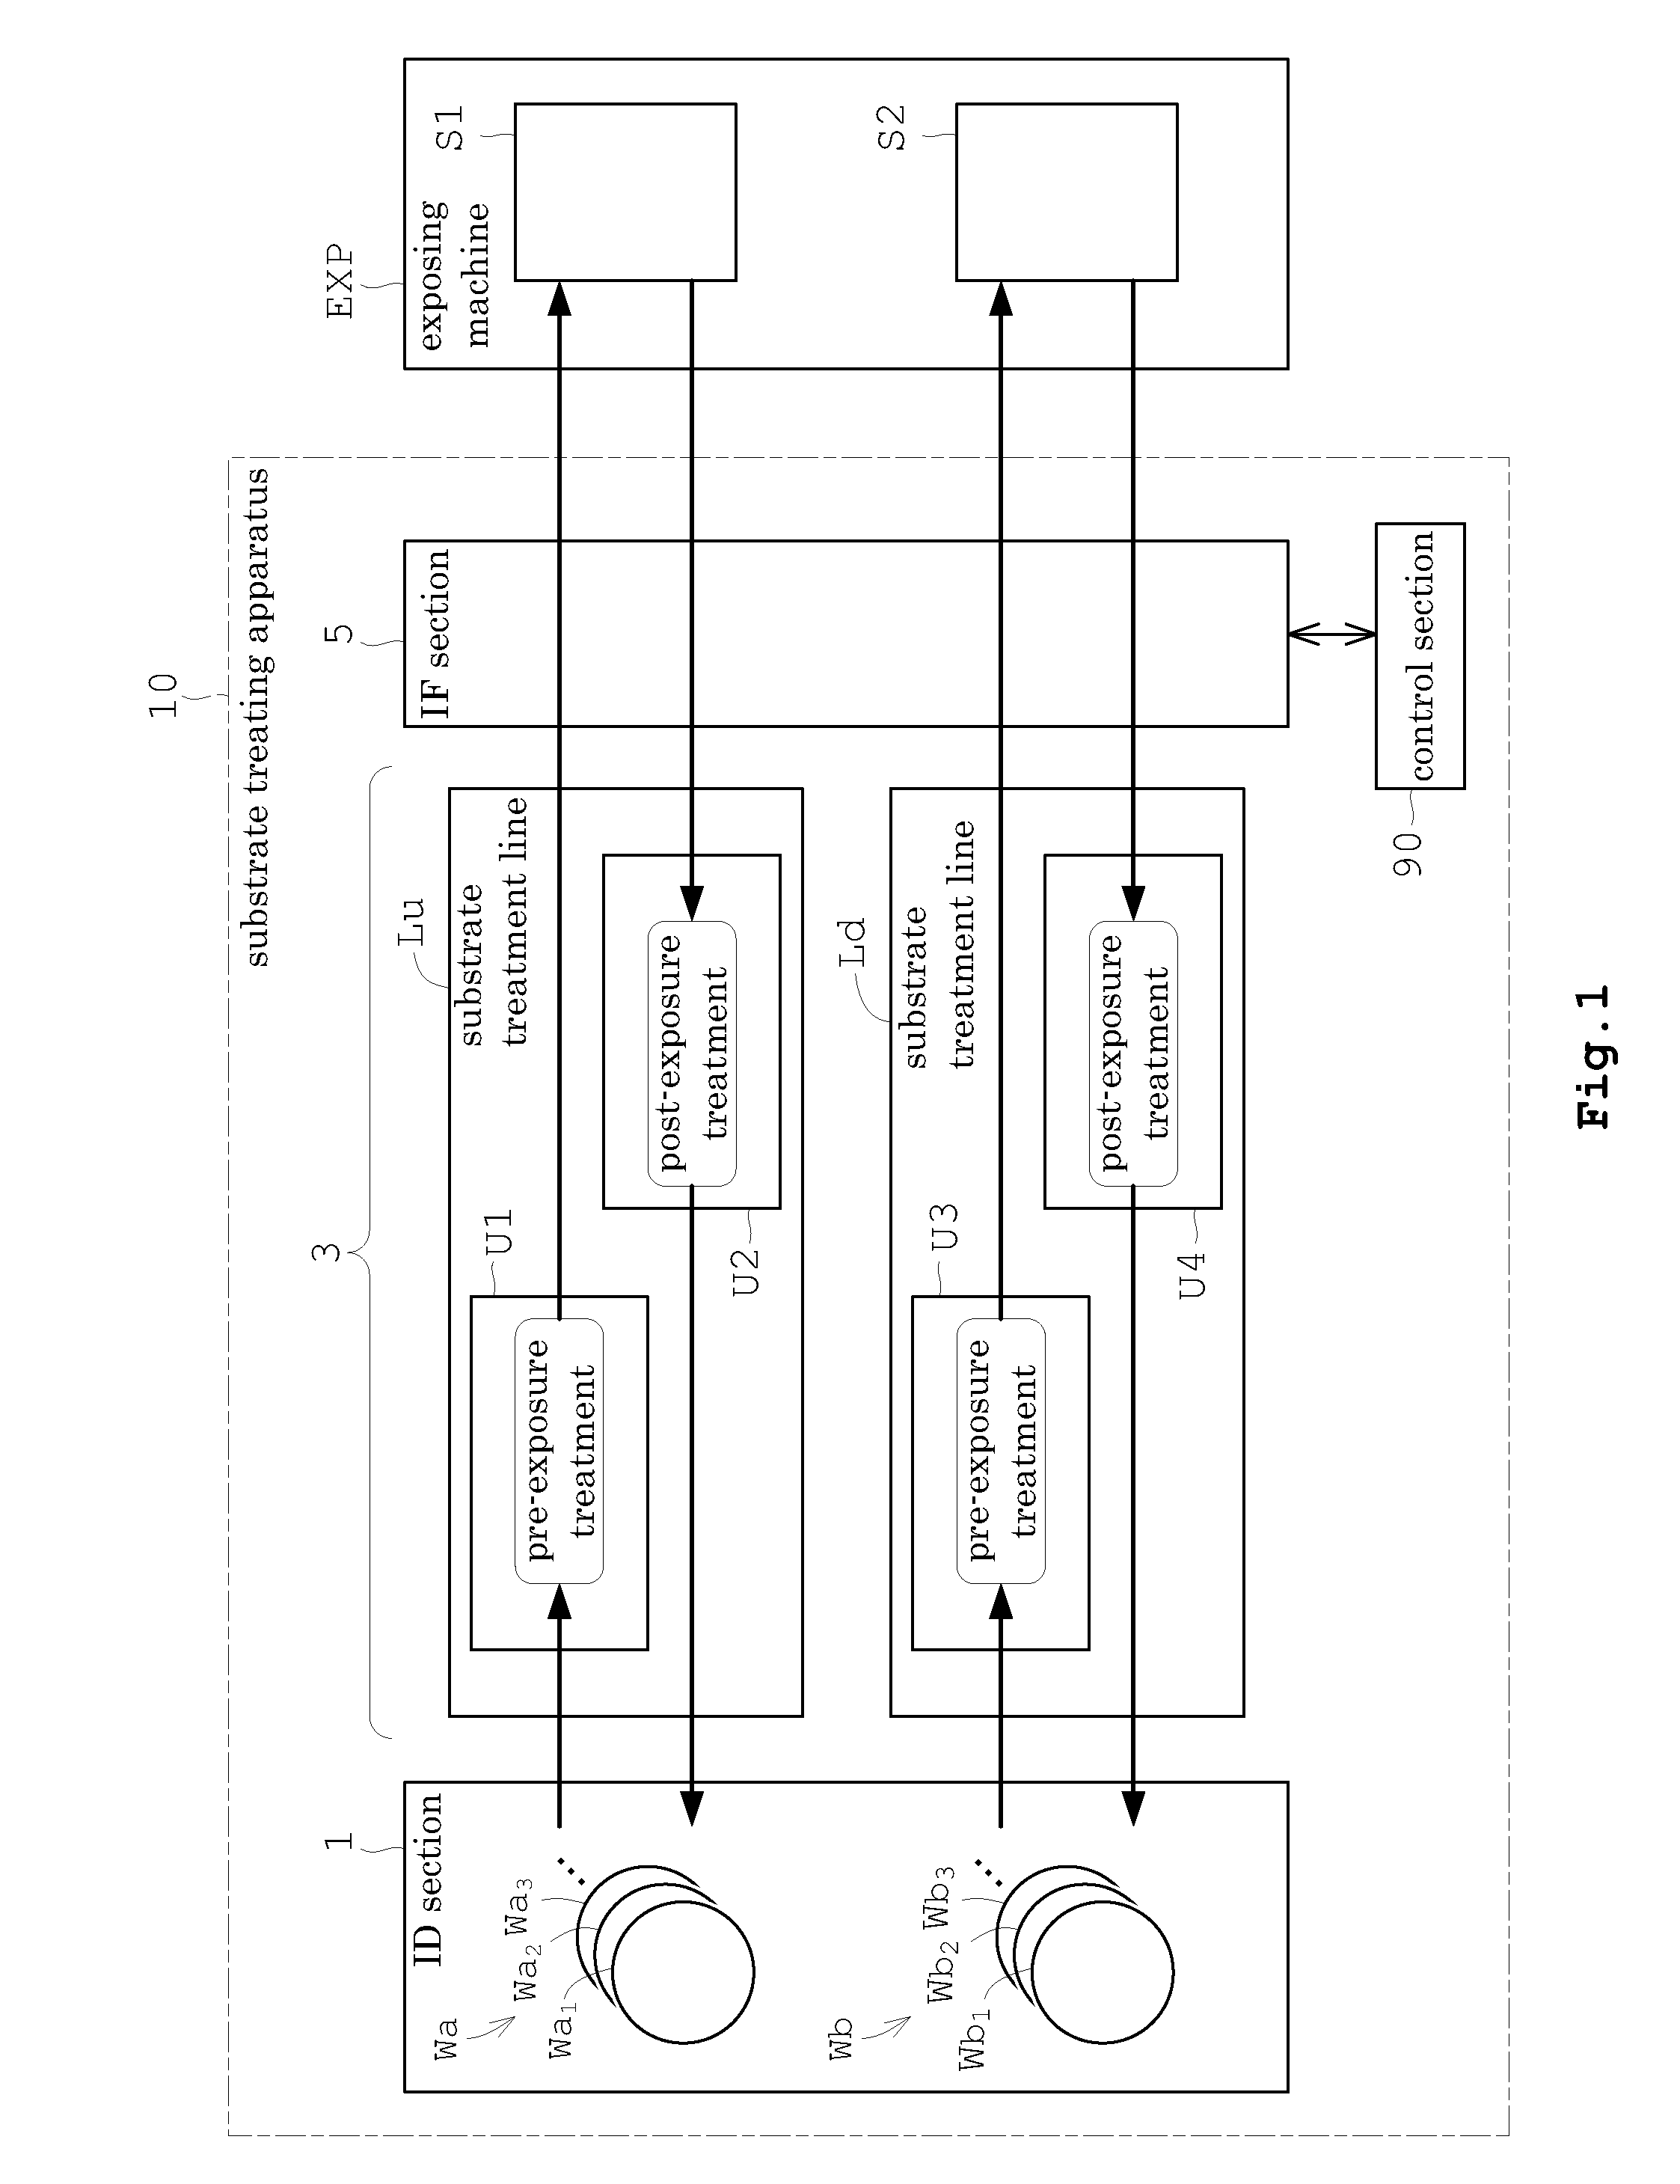 Multi-line substrate treating apparatus